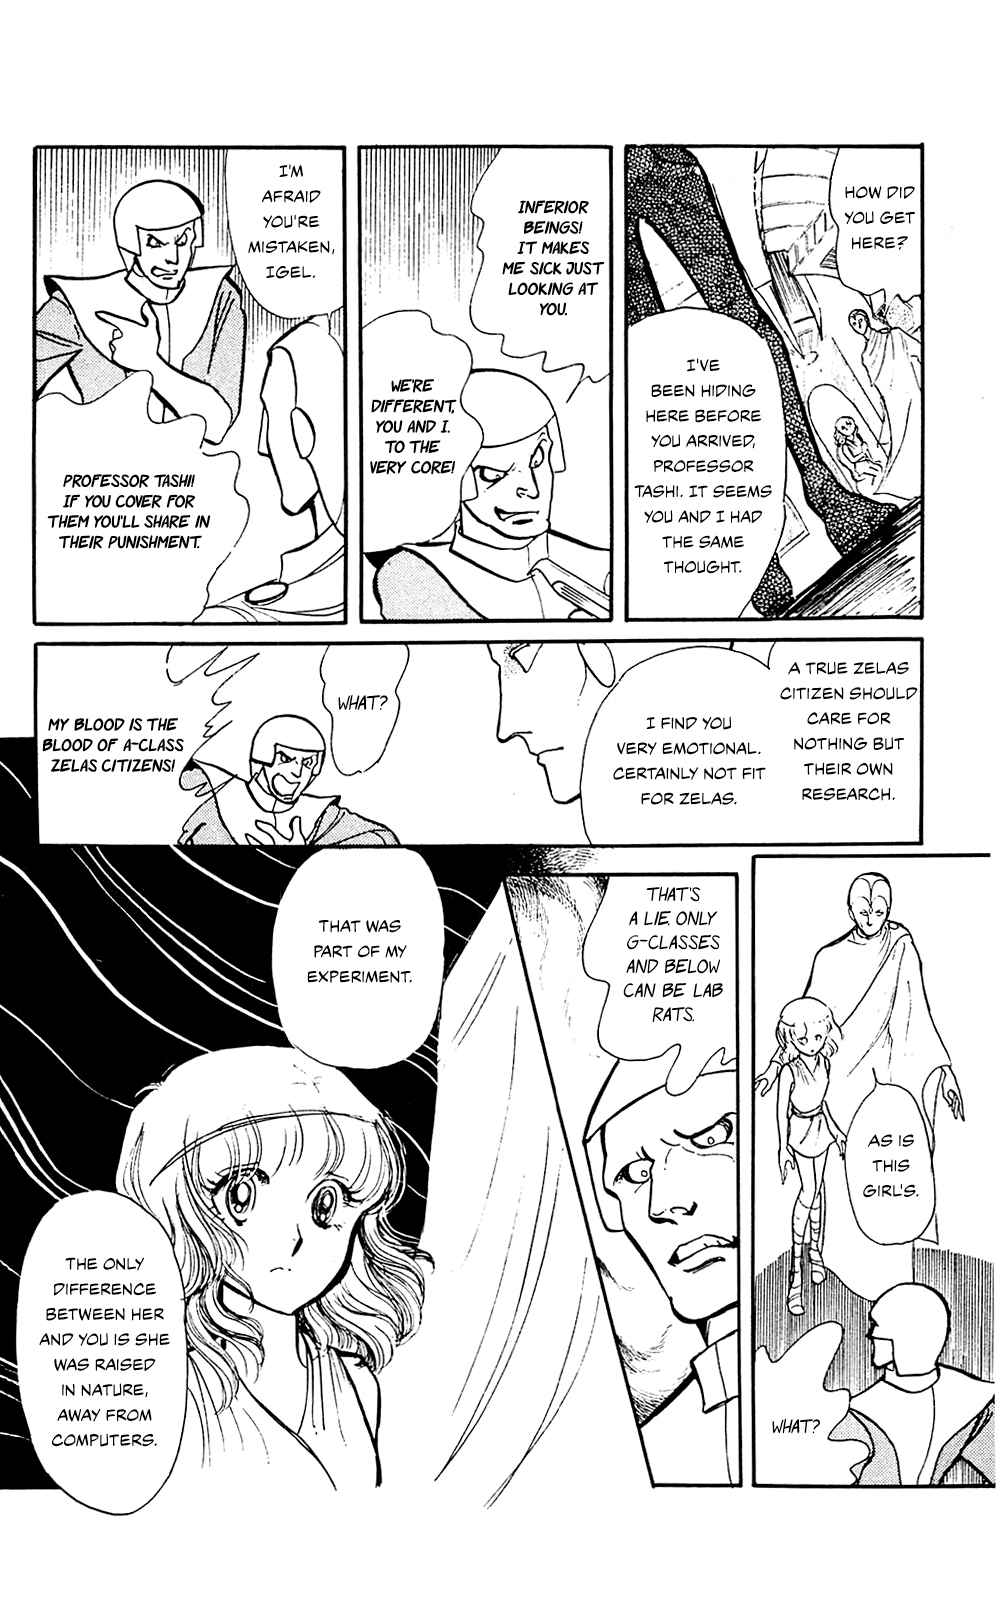 Bremen 5 Vol. 1 Ch. 1 Beyond the end of the world